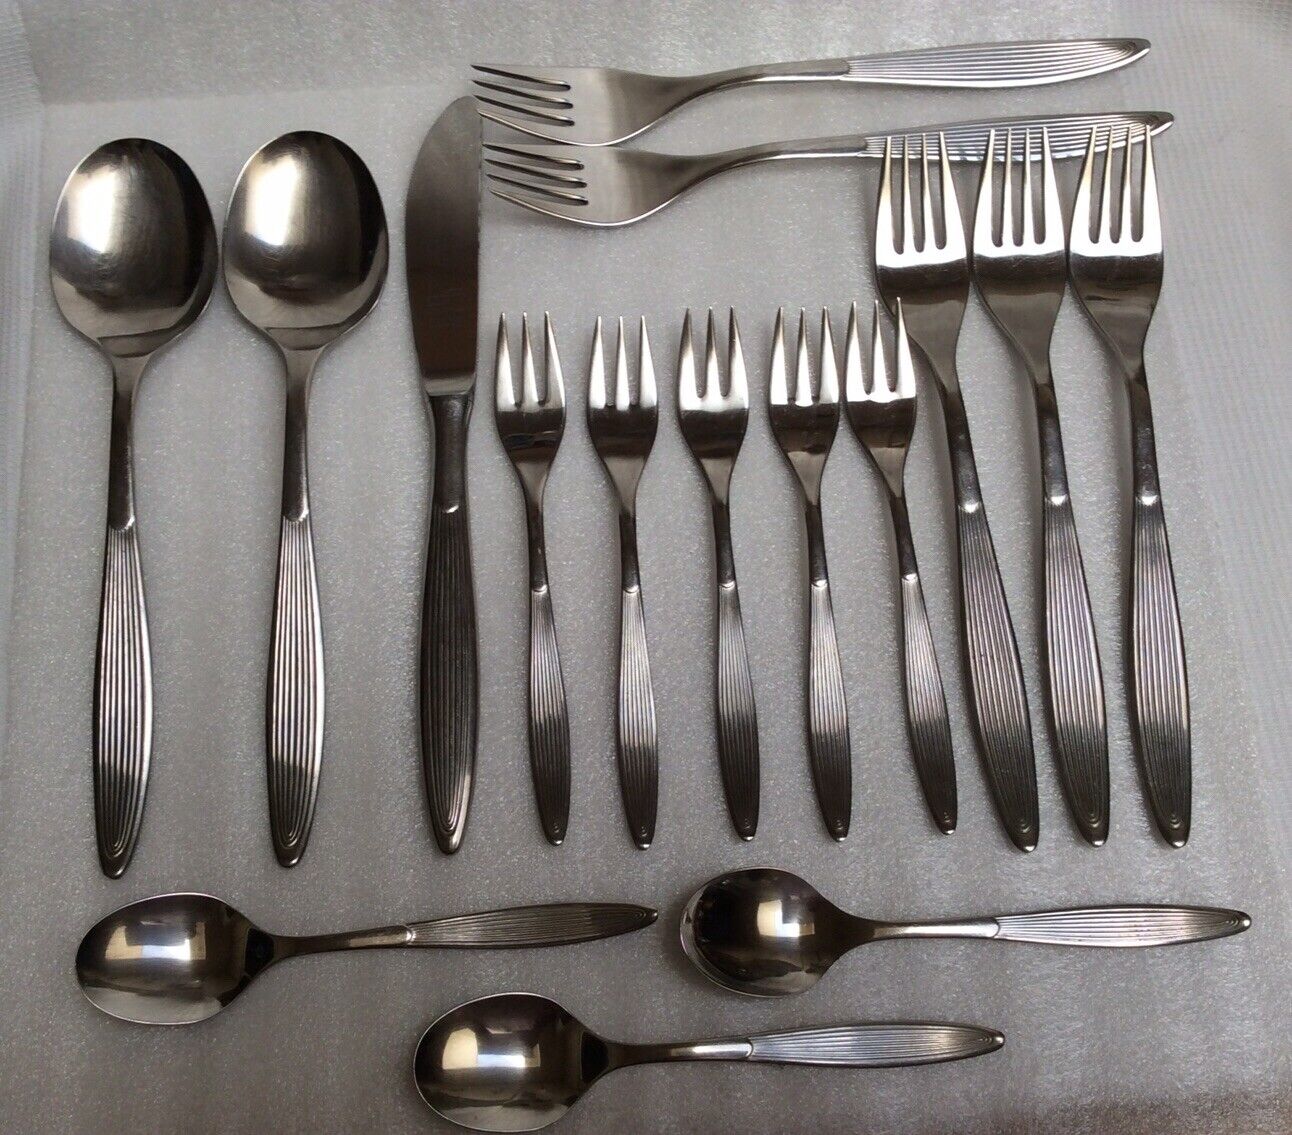 Forster Solingen Germany Stainless 18 8 Ribbed Handle 16 Pieces Forks Spoons